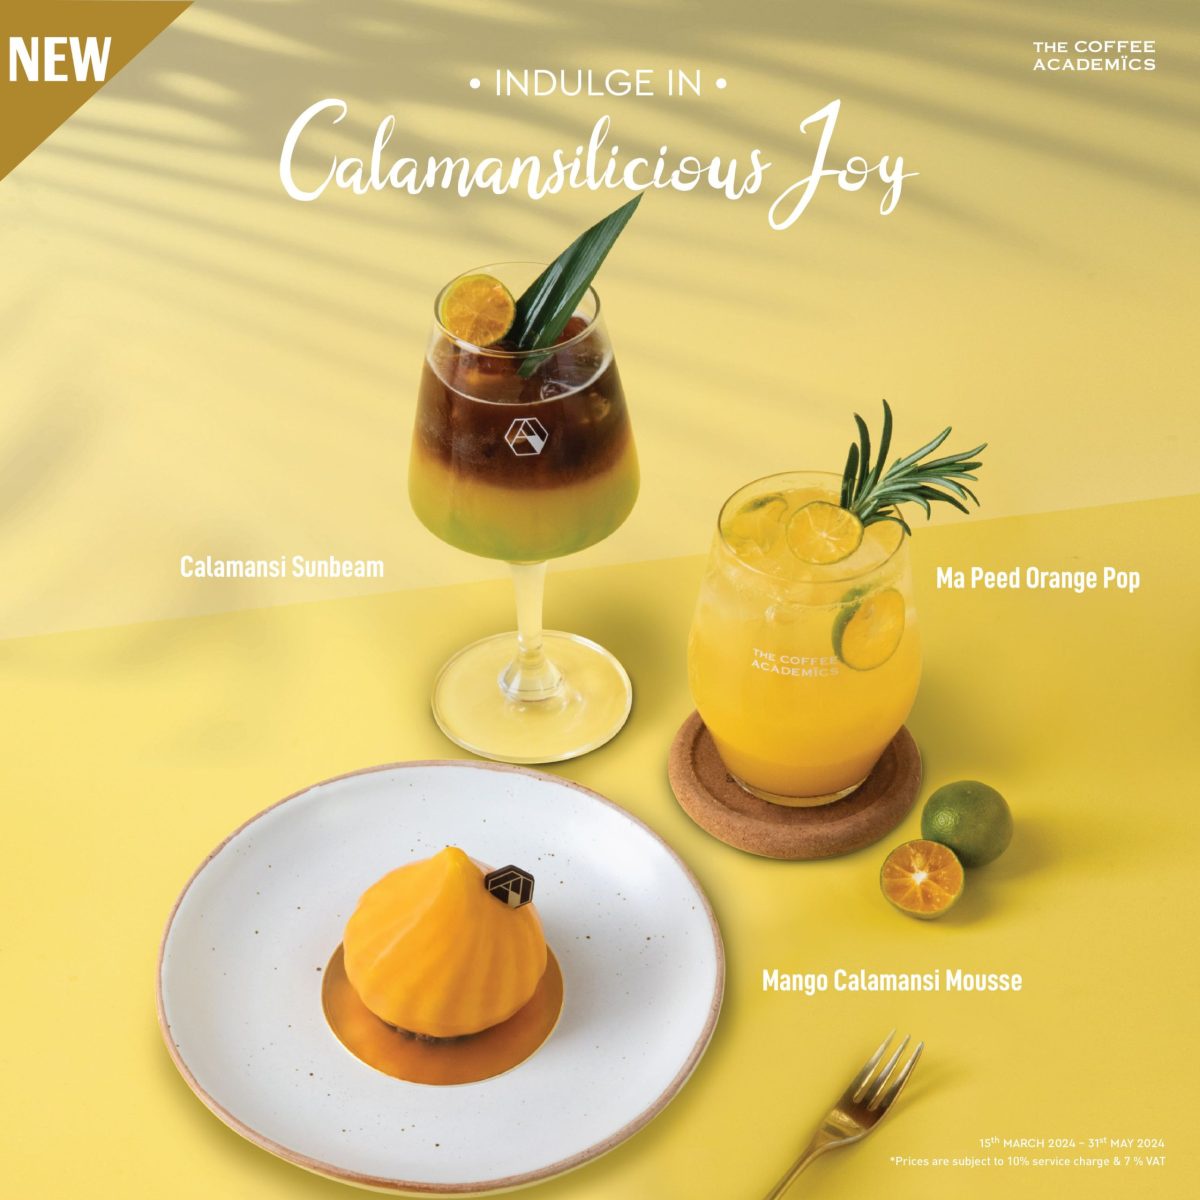 The Coffee Academ?cs introduces new refreshing summer menu items made from Calamansi, available from today - 31 May